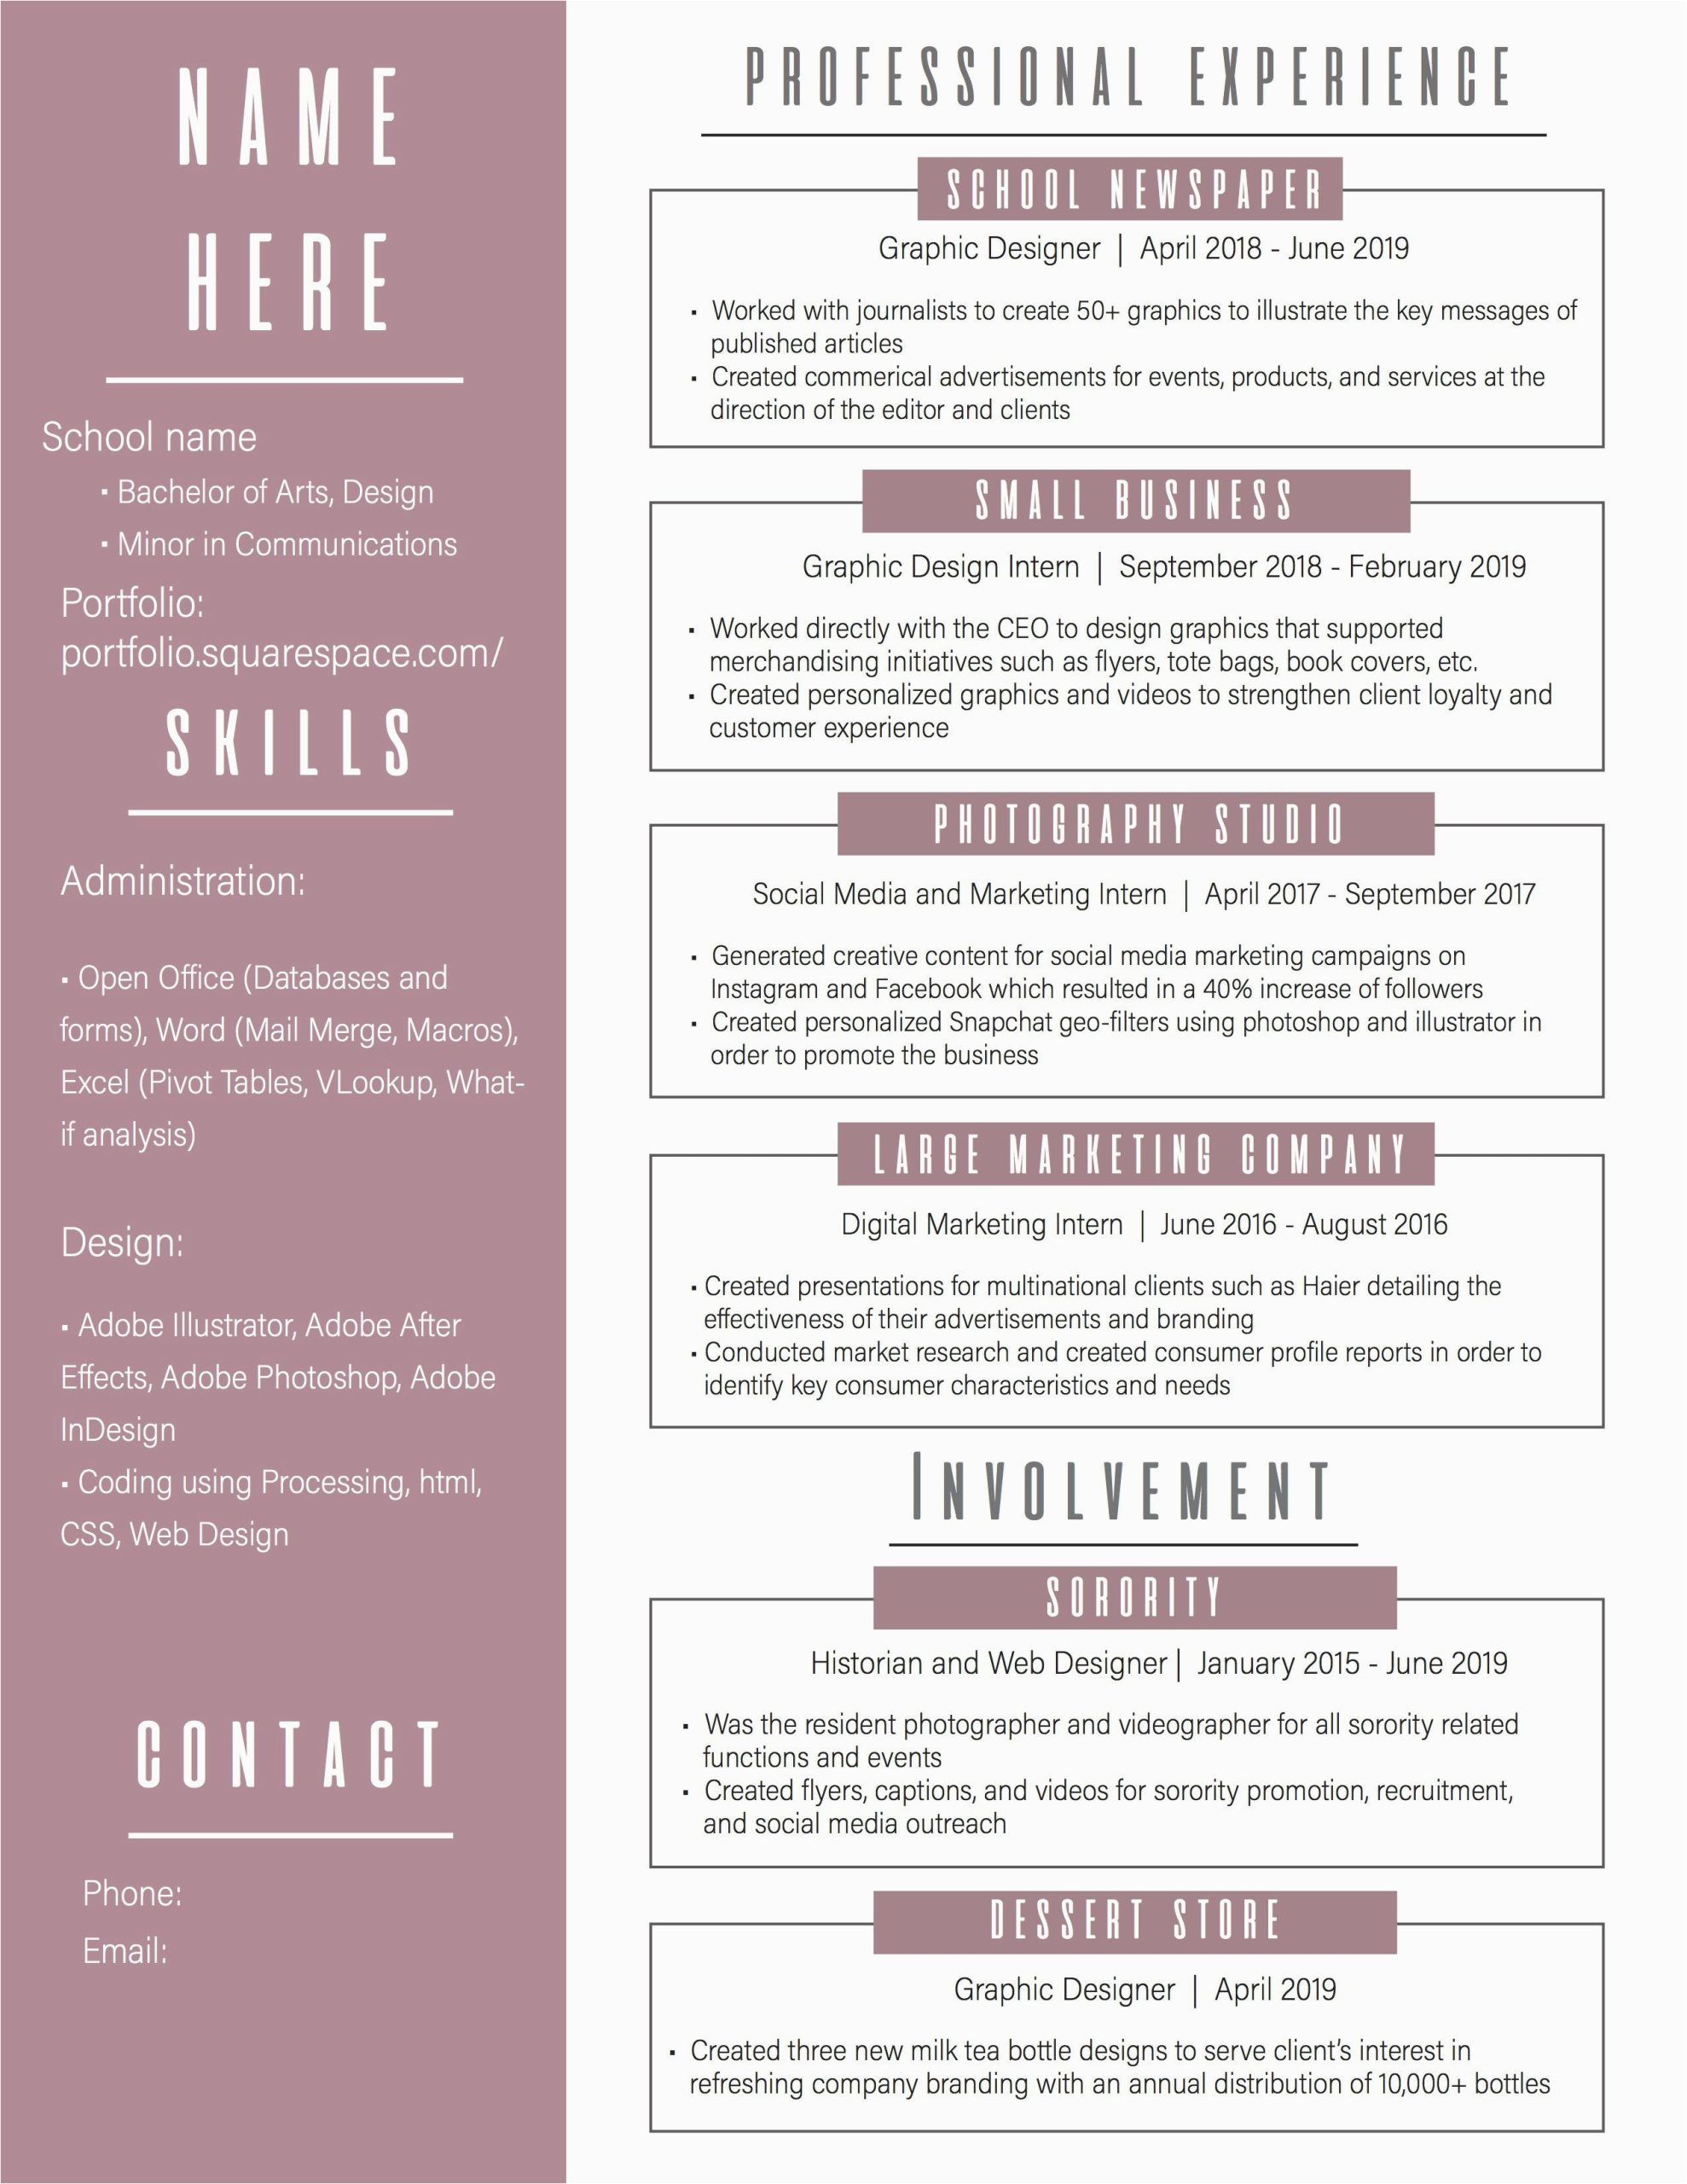 Sample Resumes for Graphic Design Recent Graduate Recent Graduate Graphic Design Resume Resumes